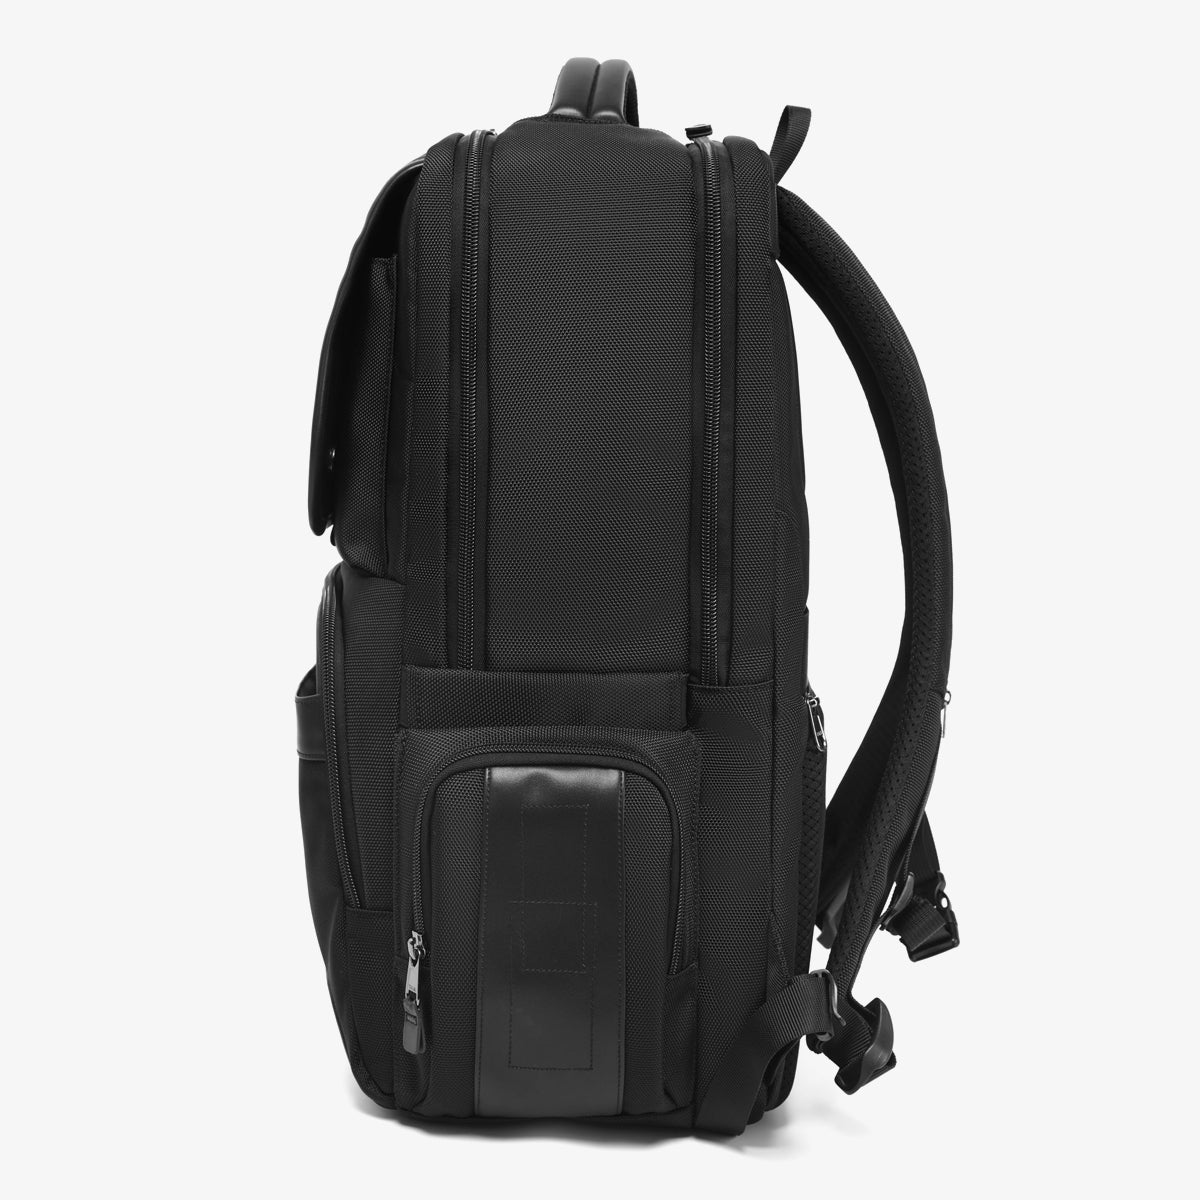 Tigernu T-B3916 Anti-Theft 17 inch Laptop Backpack Bag with FREE Lock ...